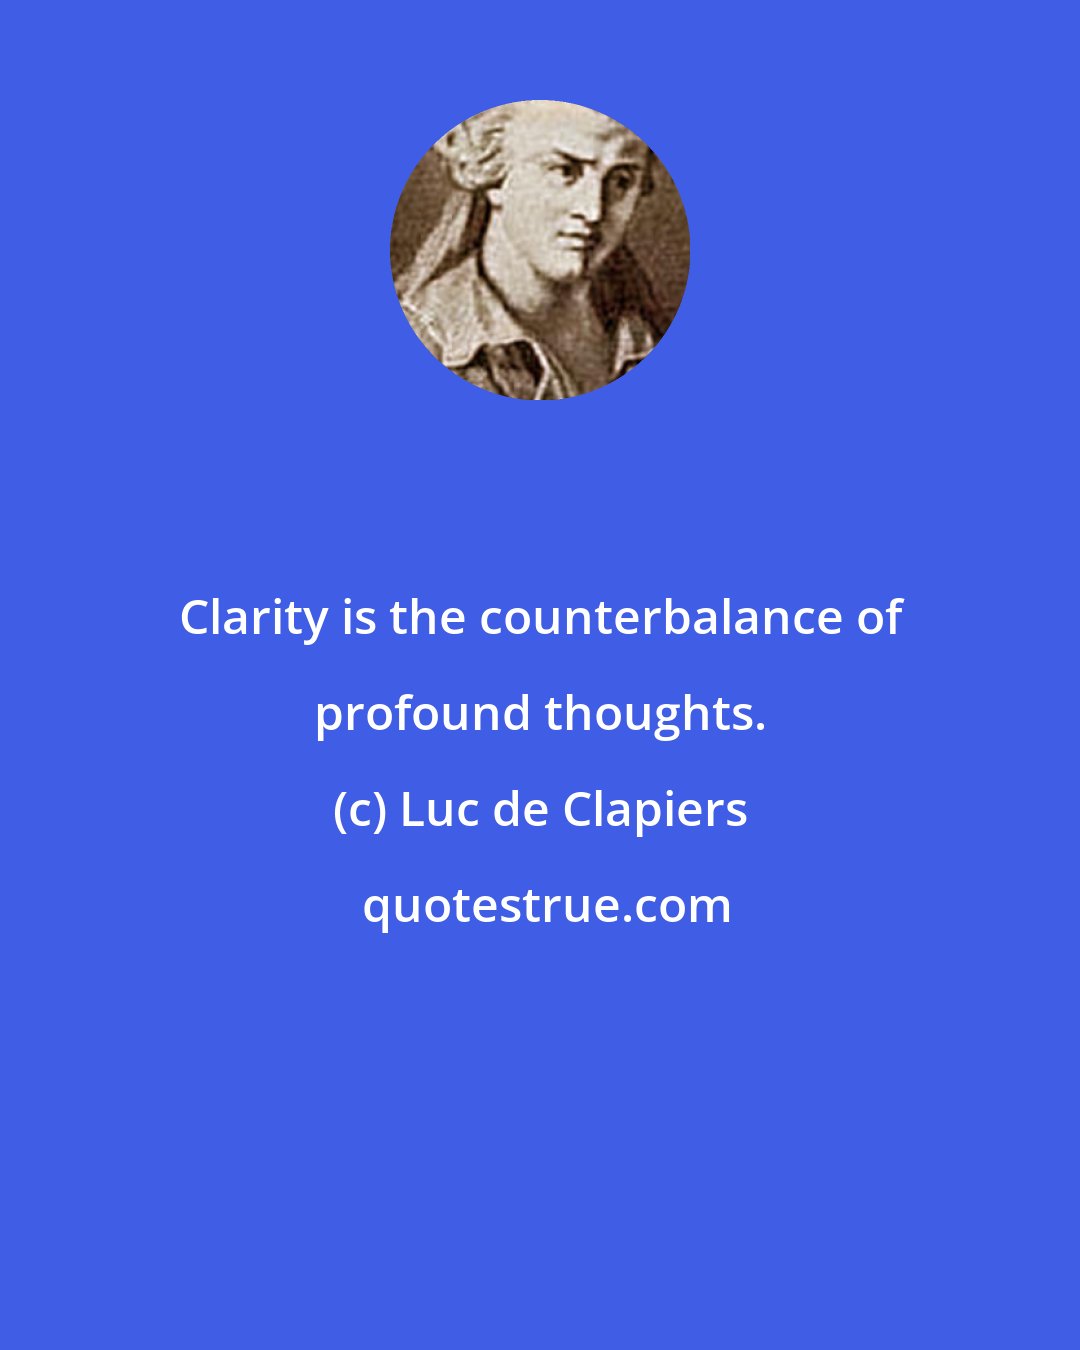 Luc de Clapiers: Clarity is the counterbalance of profound thoughts.